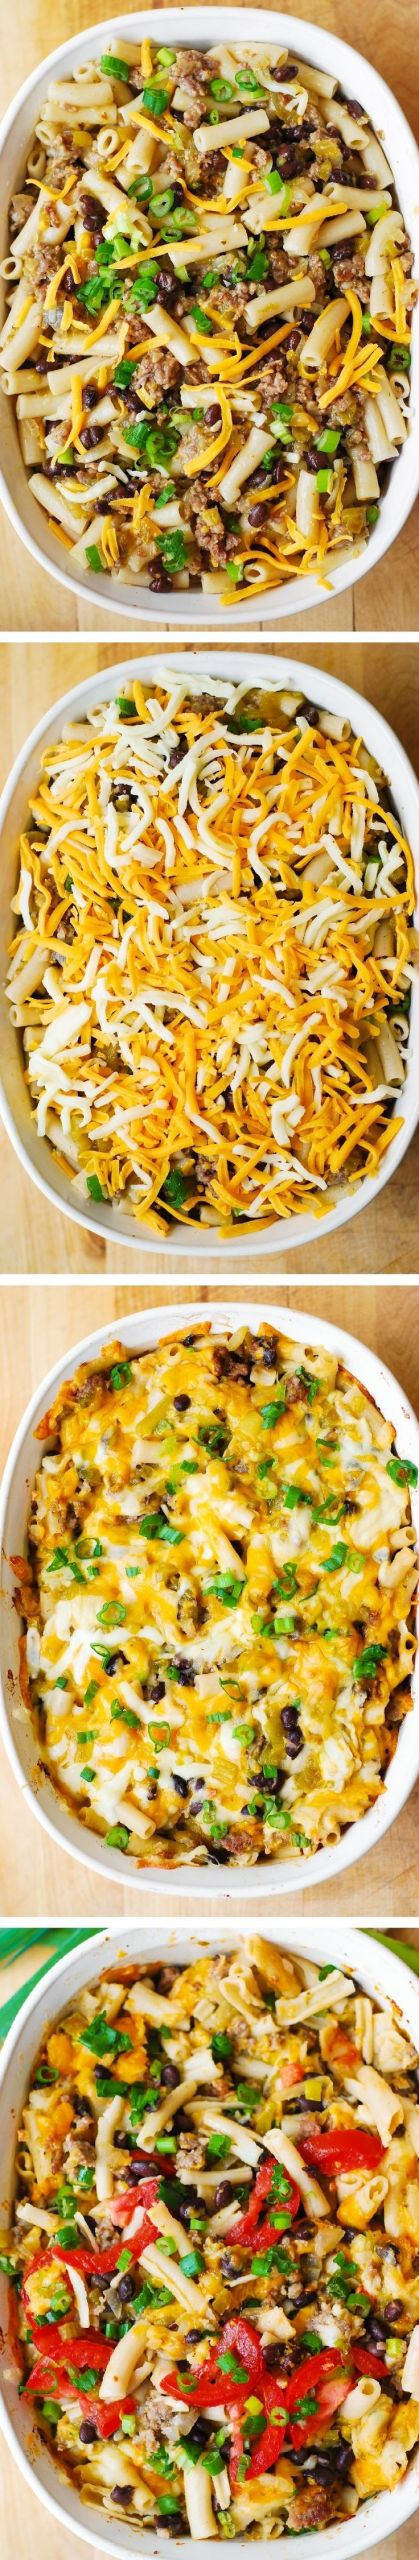 Mexican Mac And Cheese Casserole
 17 Best images about gluten free food on Pinterest